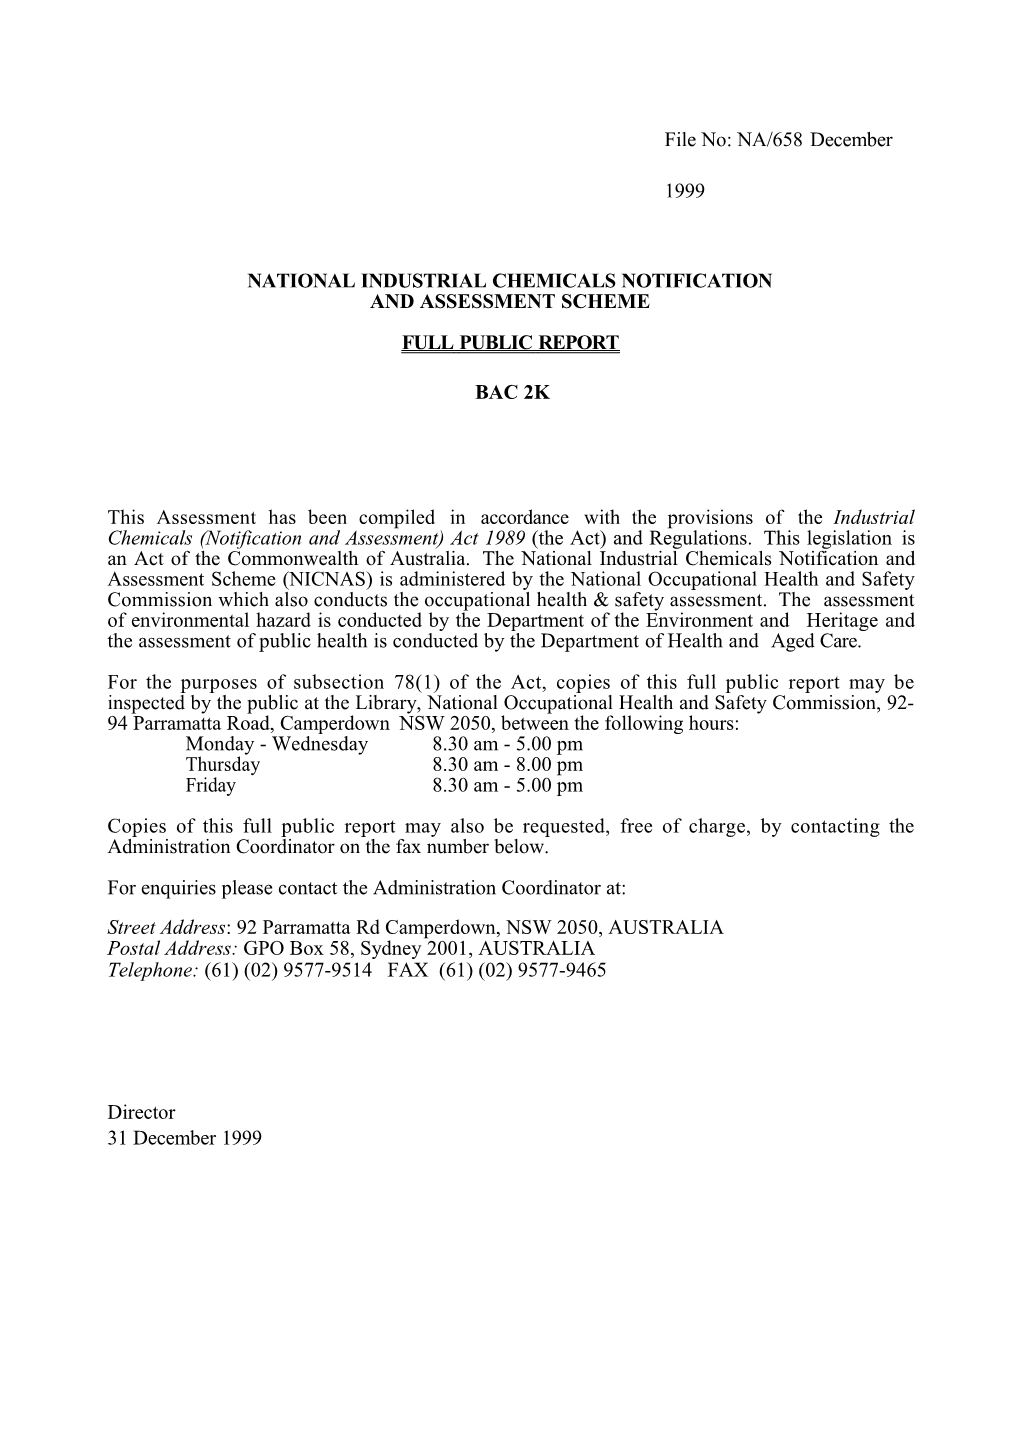 National Industrial Chemicals Notification and Assessment Scheme s66